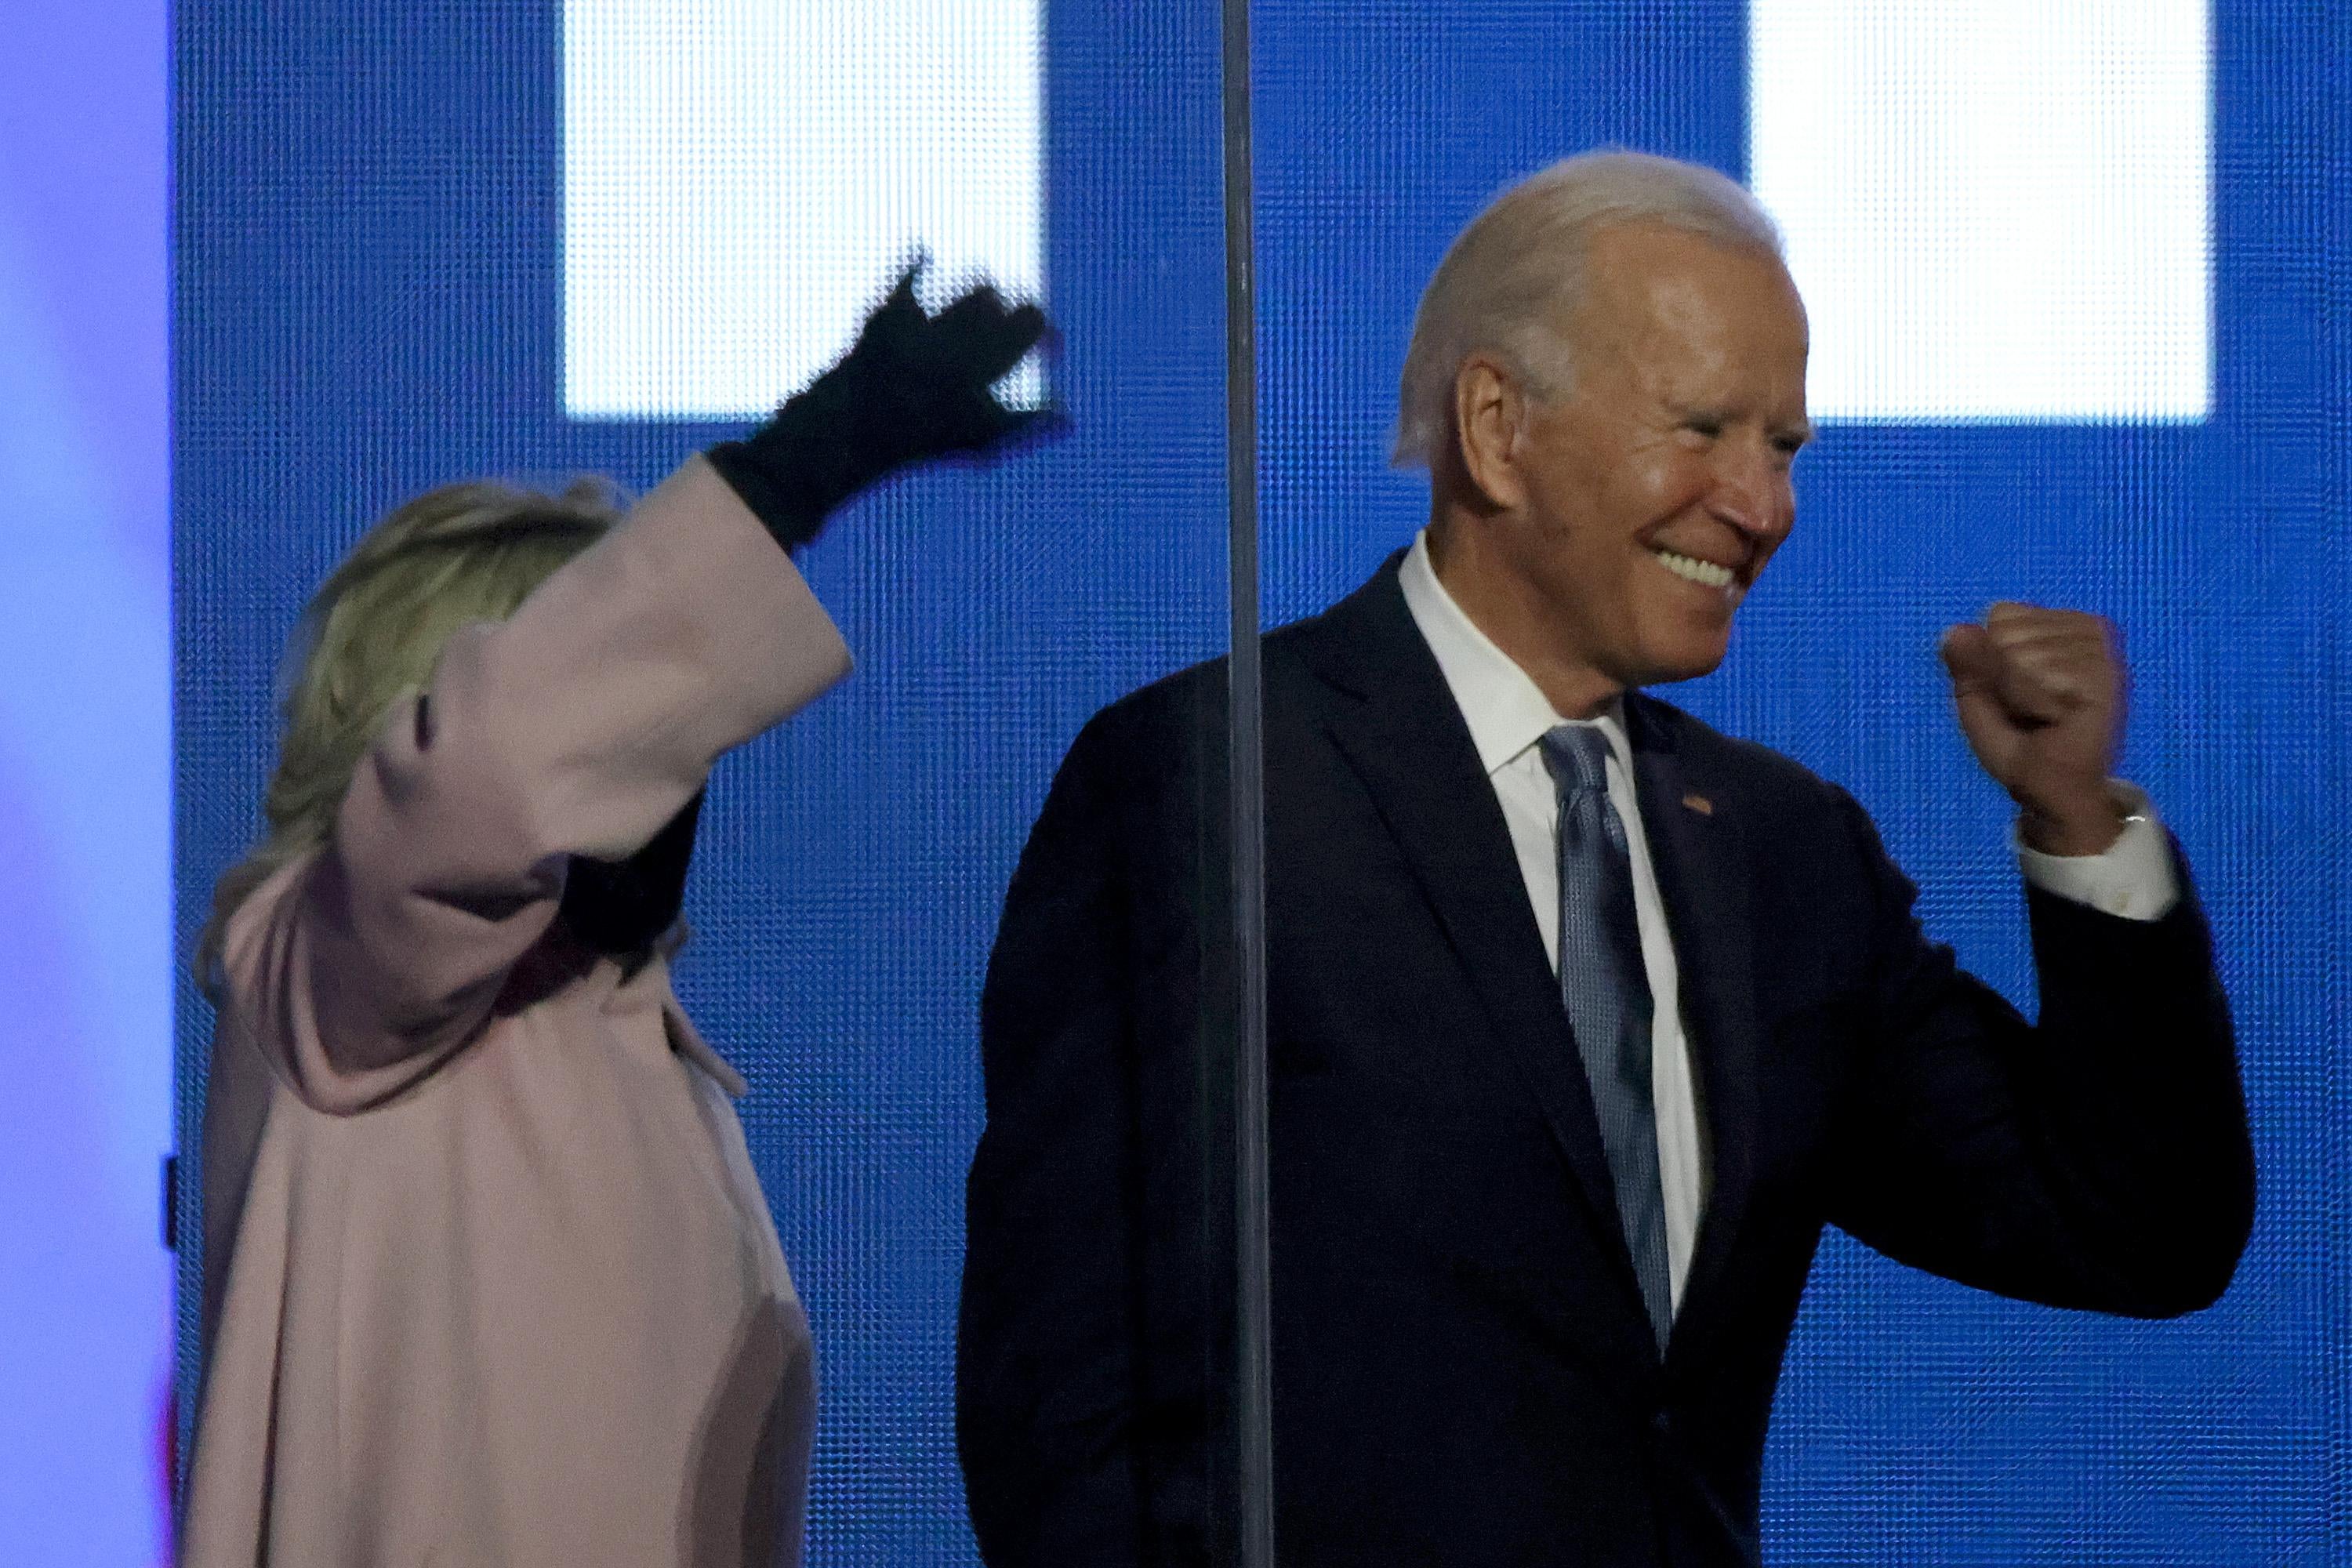 Joe Biden grins and pumps his fist next to his wife, Jill, who waves to the crowd.